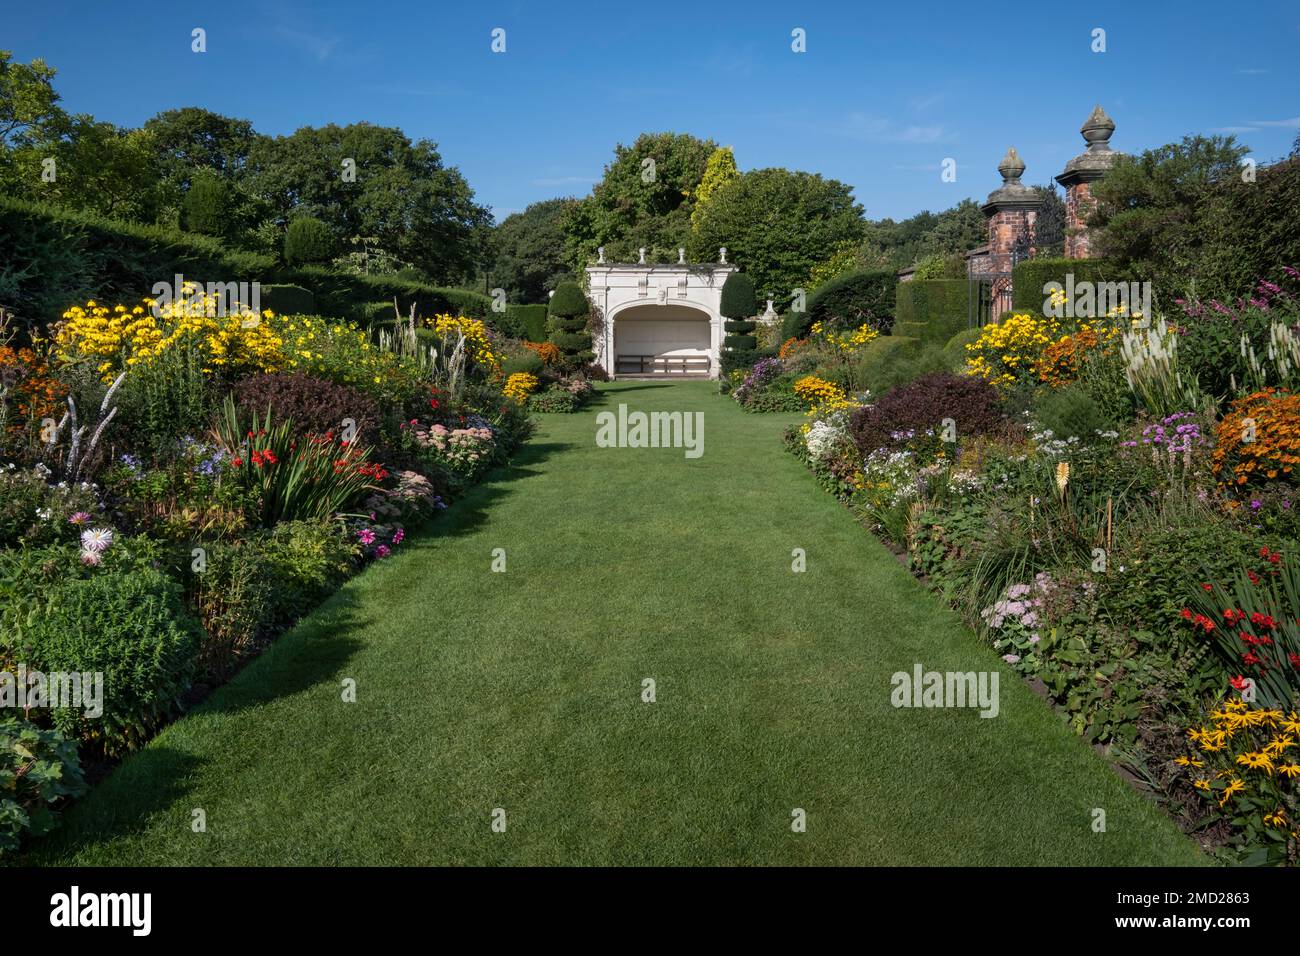 The double Herbaceous Borders en été, Arley Hall & Gardens, Arley, Cheshire, Angleterre, Royaume-Uni Banque D'Images